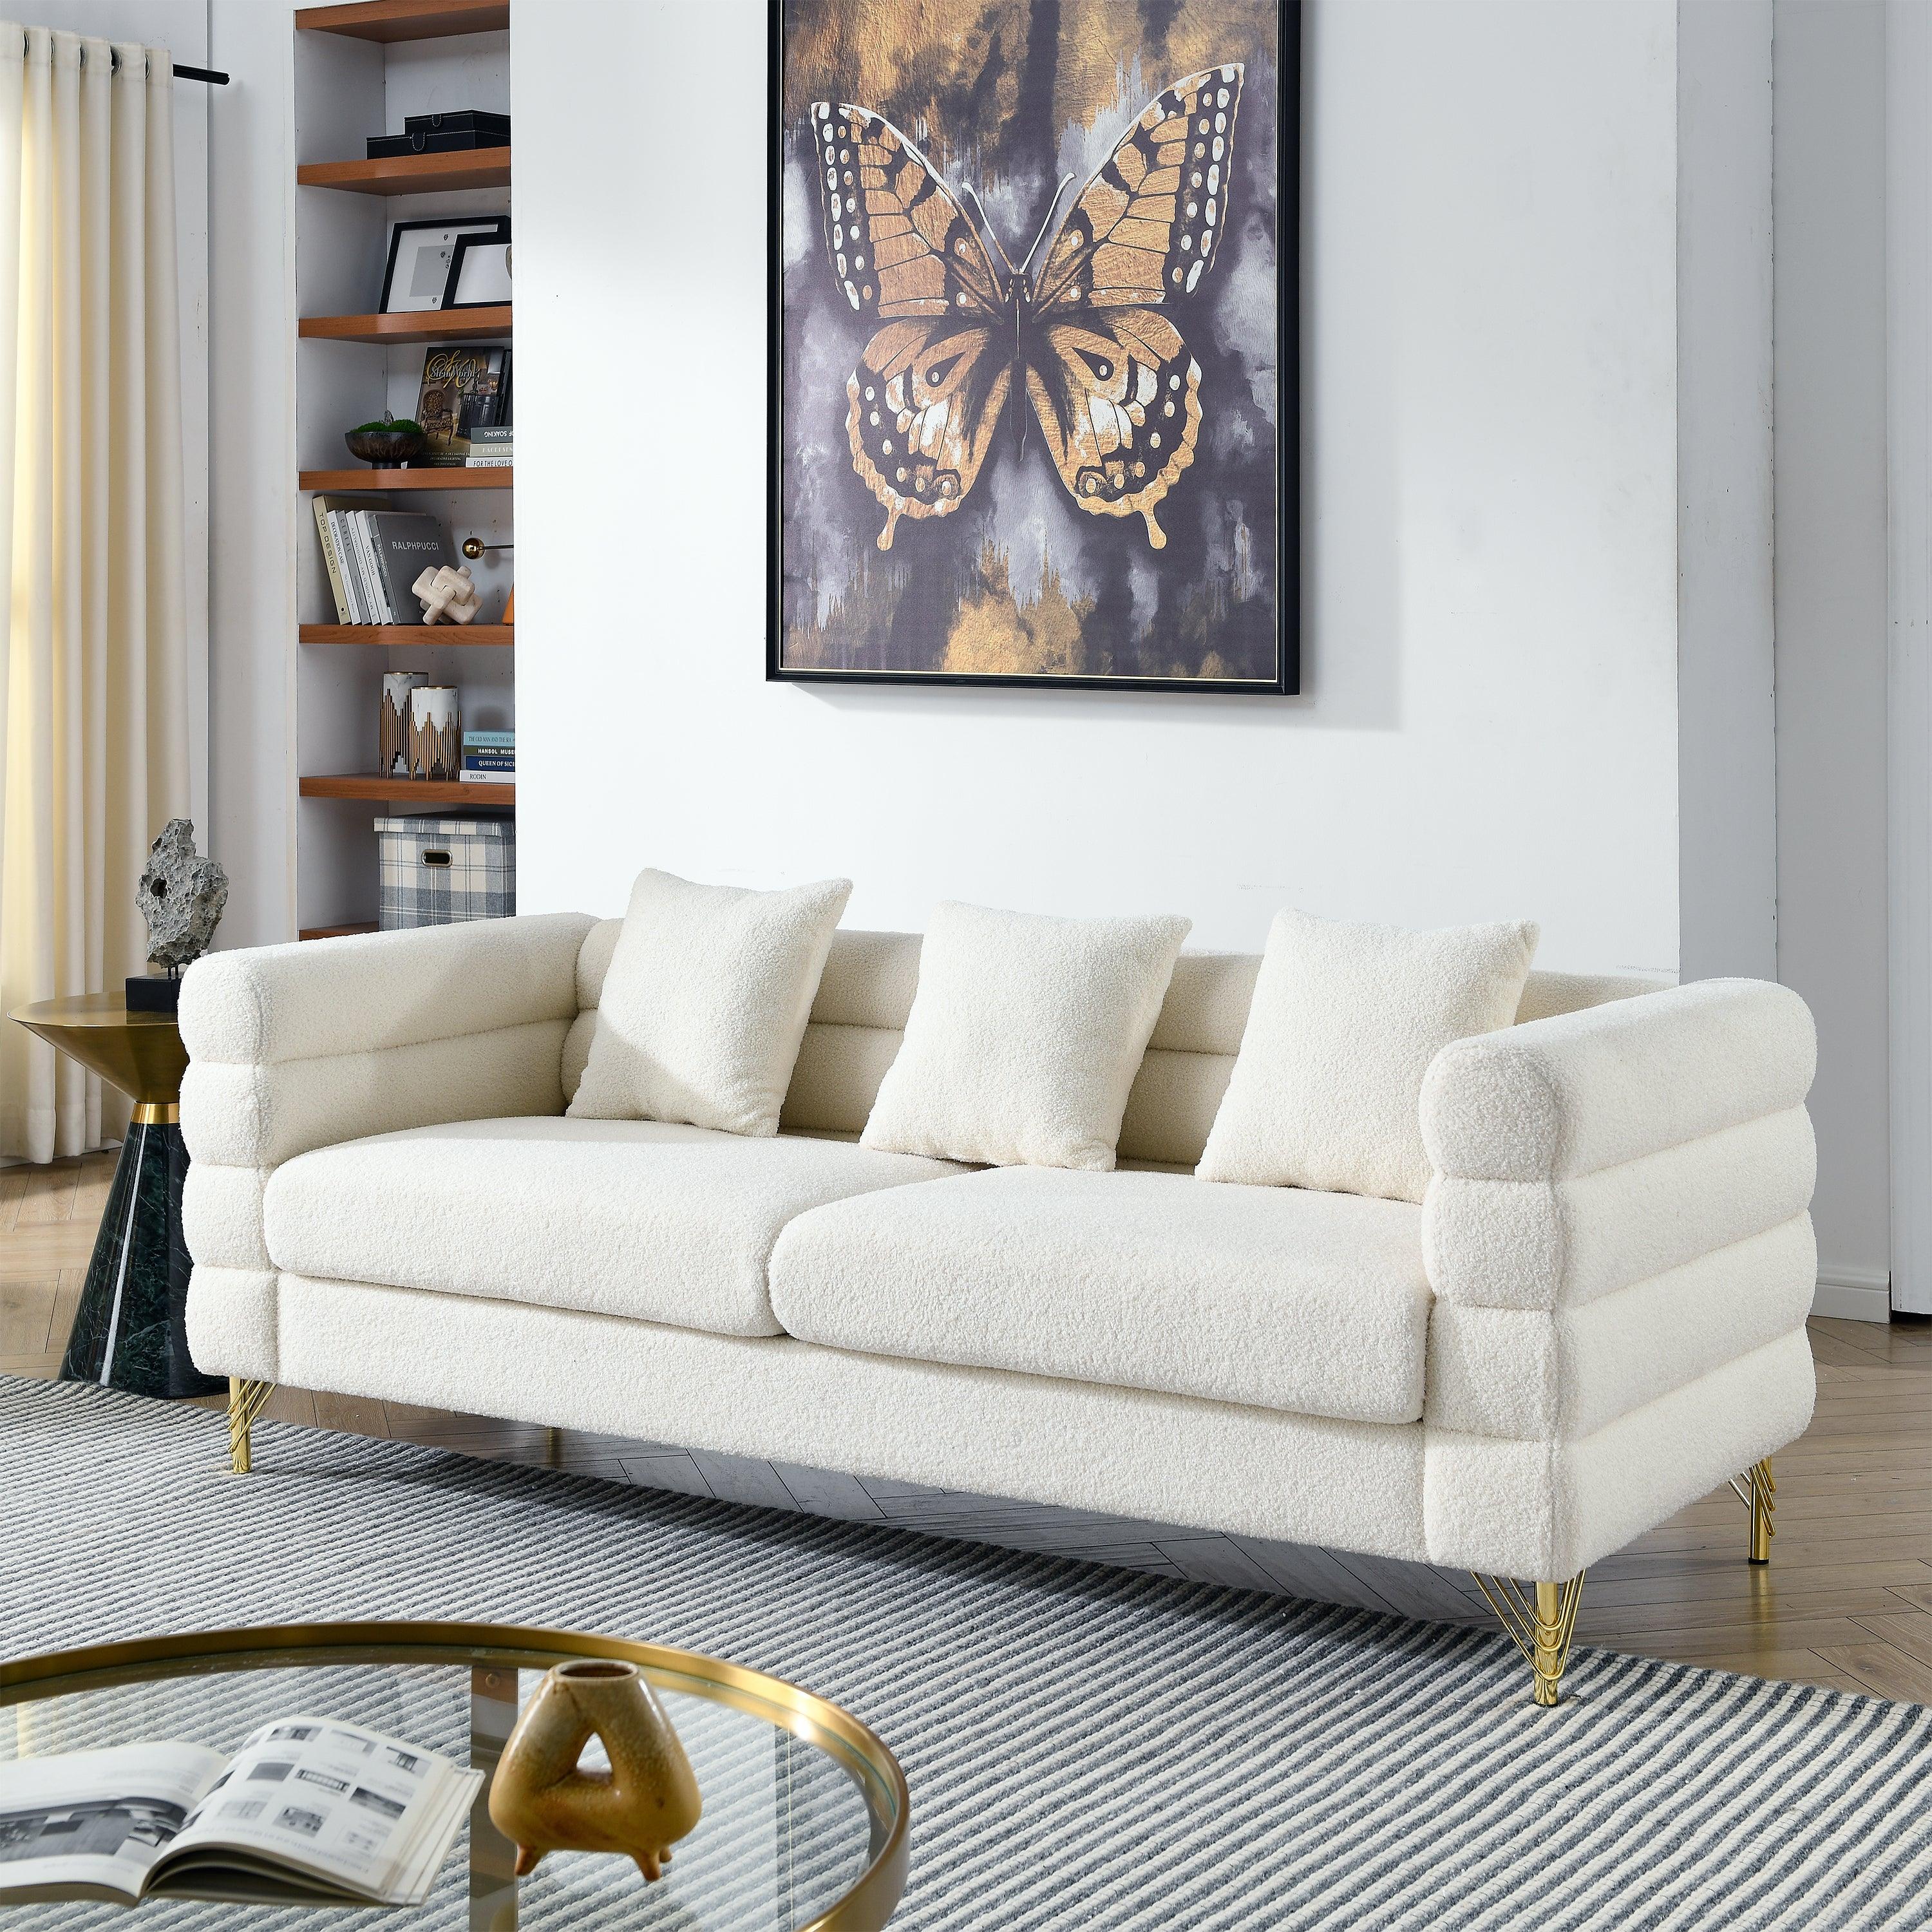 🆓🚛 81" Oversized 3 Seater Sectional Sofa, Living Room Comfort Fabric Sectional Sofa - Deep Seating Sectional Sofa, Soft Sitting With 3 Pillows for Living Room, Bedroom, White Teddy (Ivory)